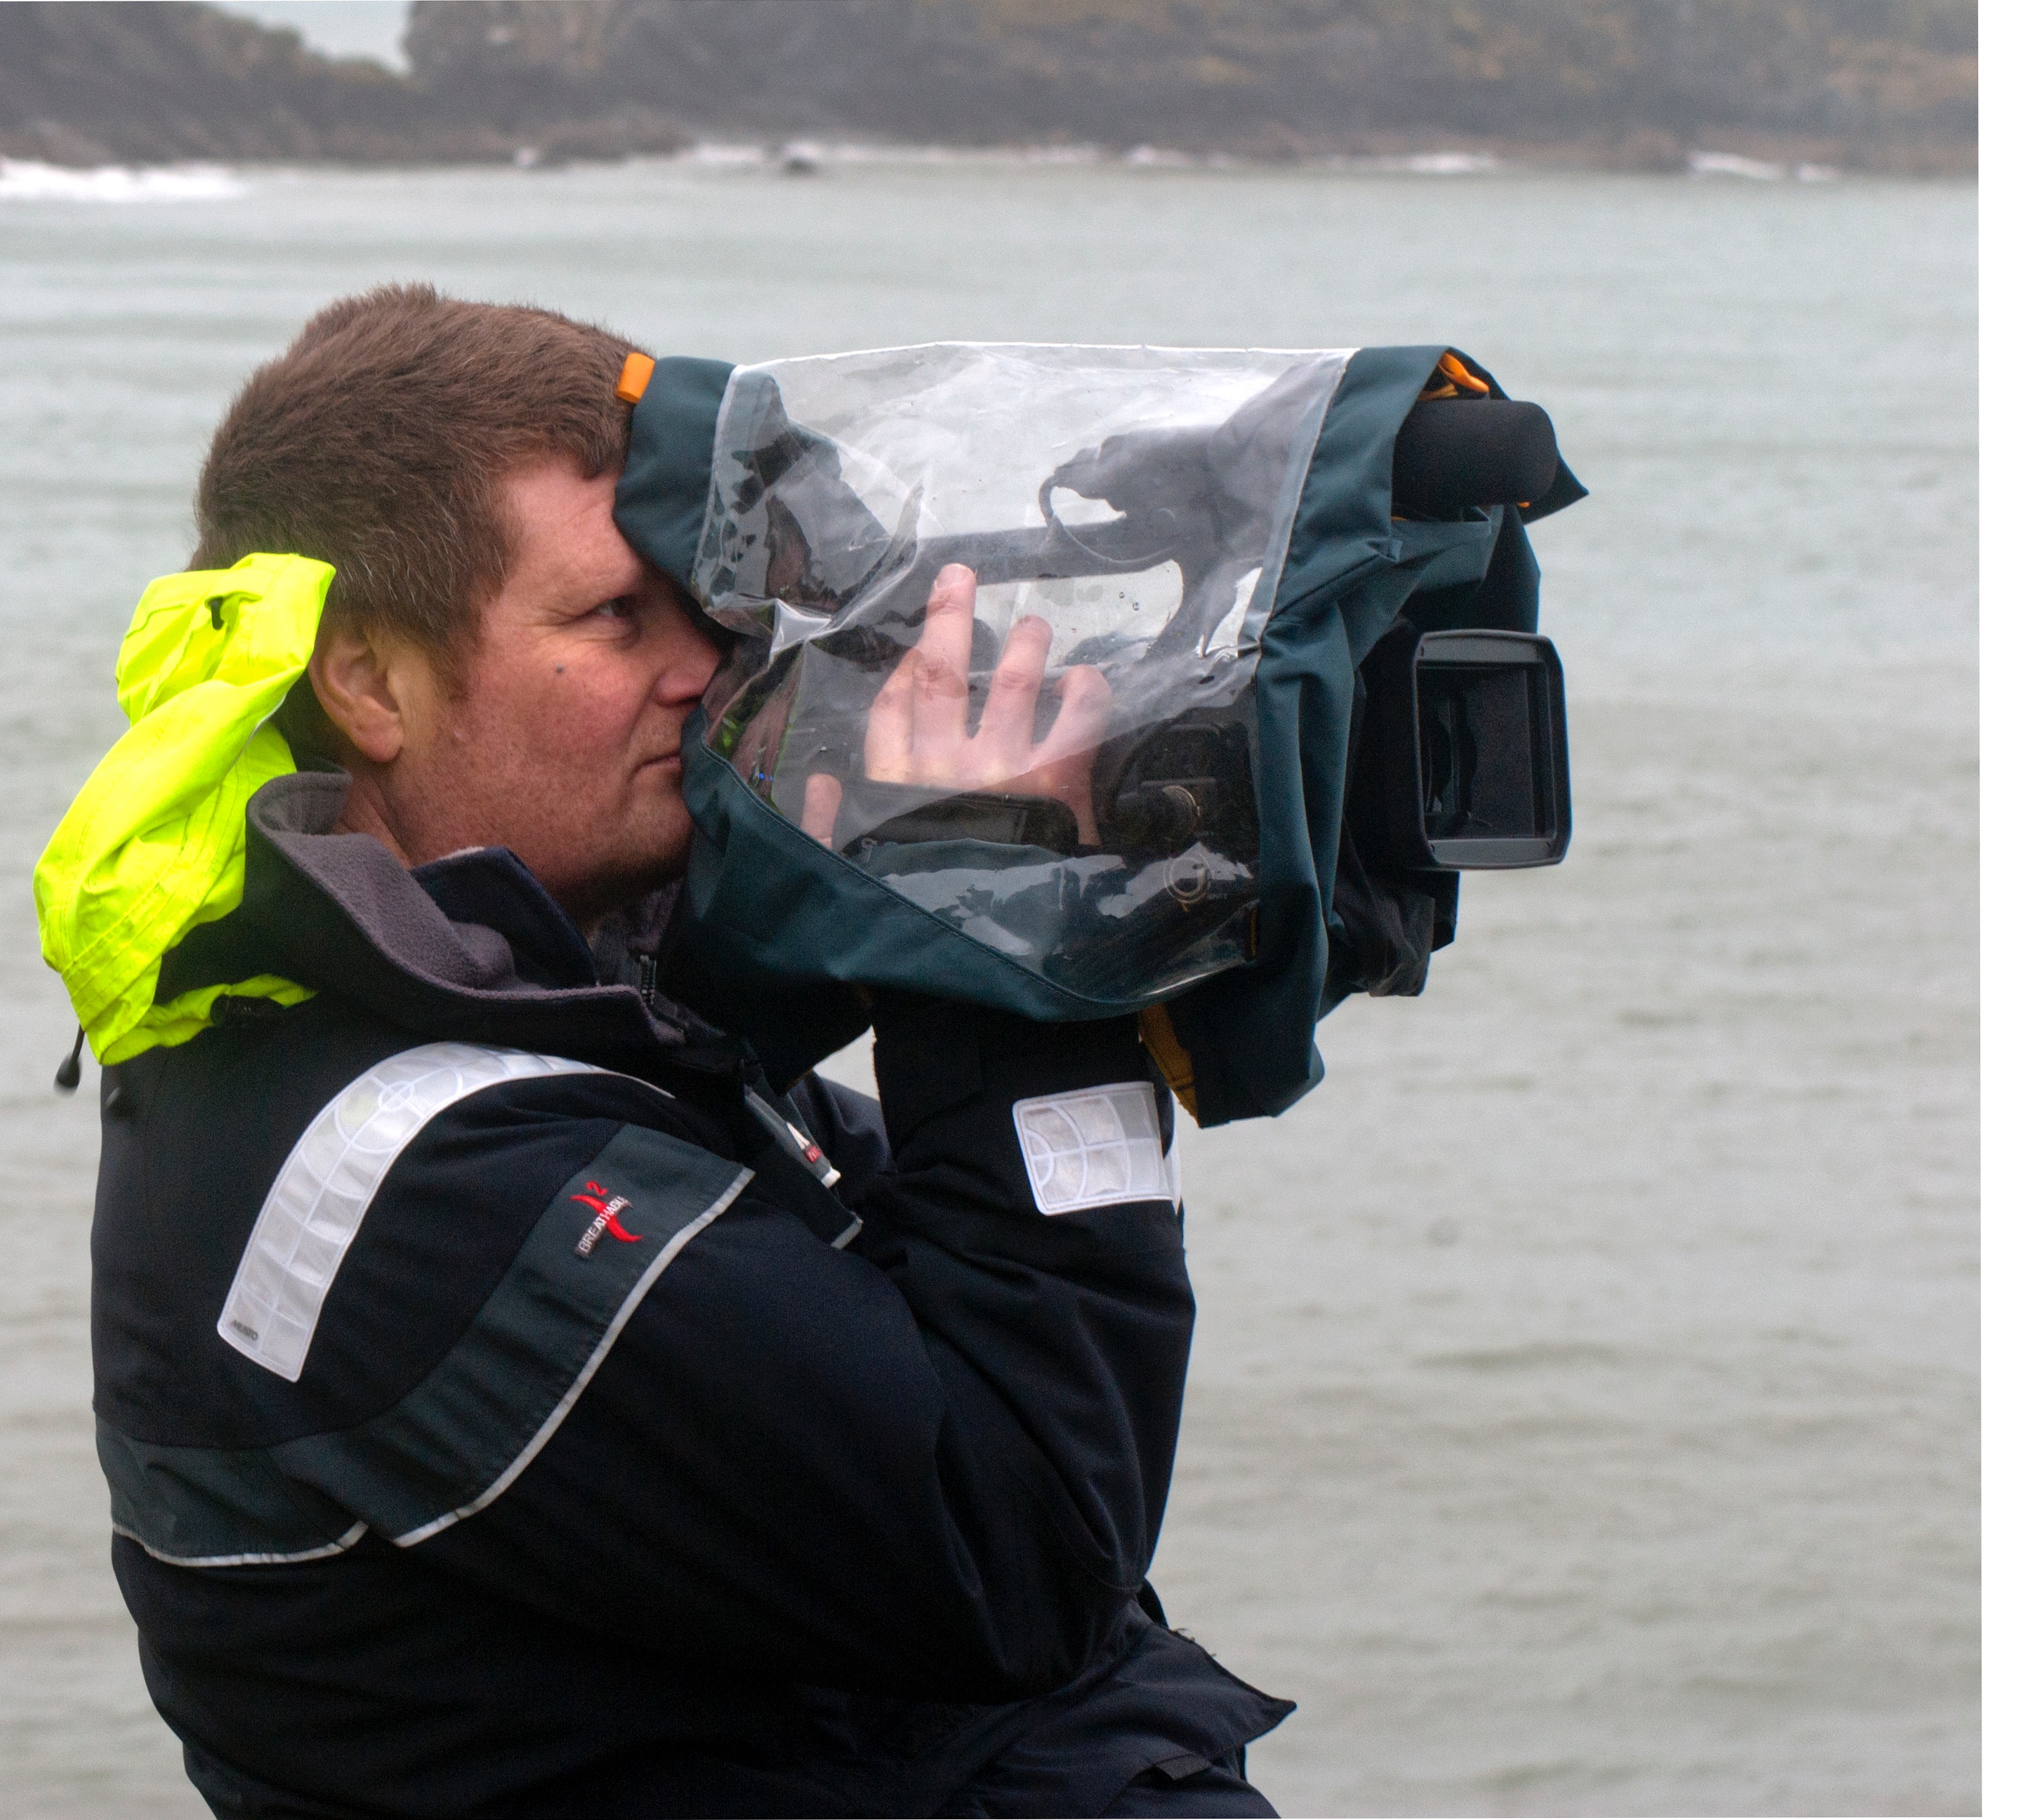 5 February 2011 - Andy Torbet - Abercastle blowhole 24